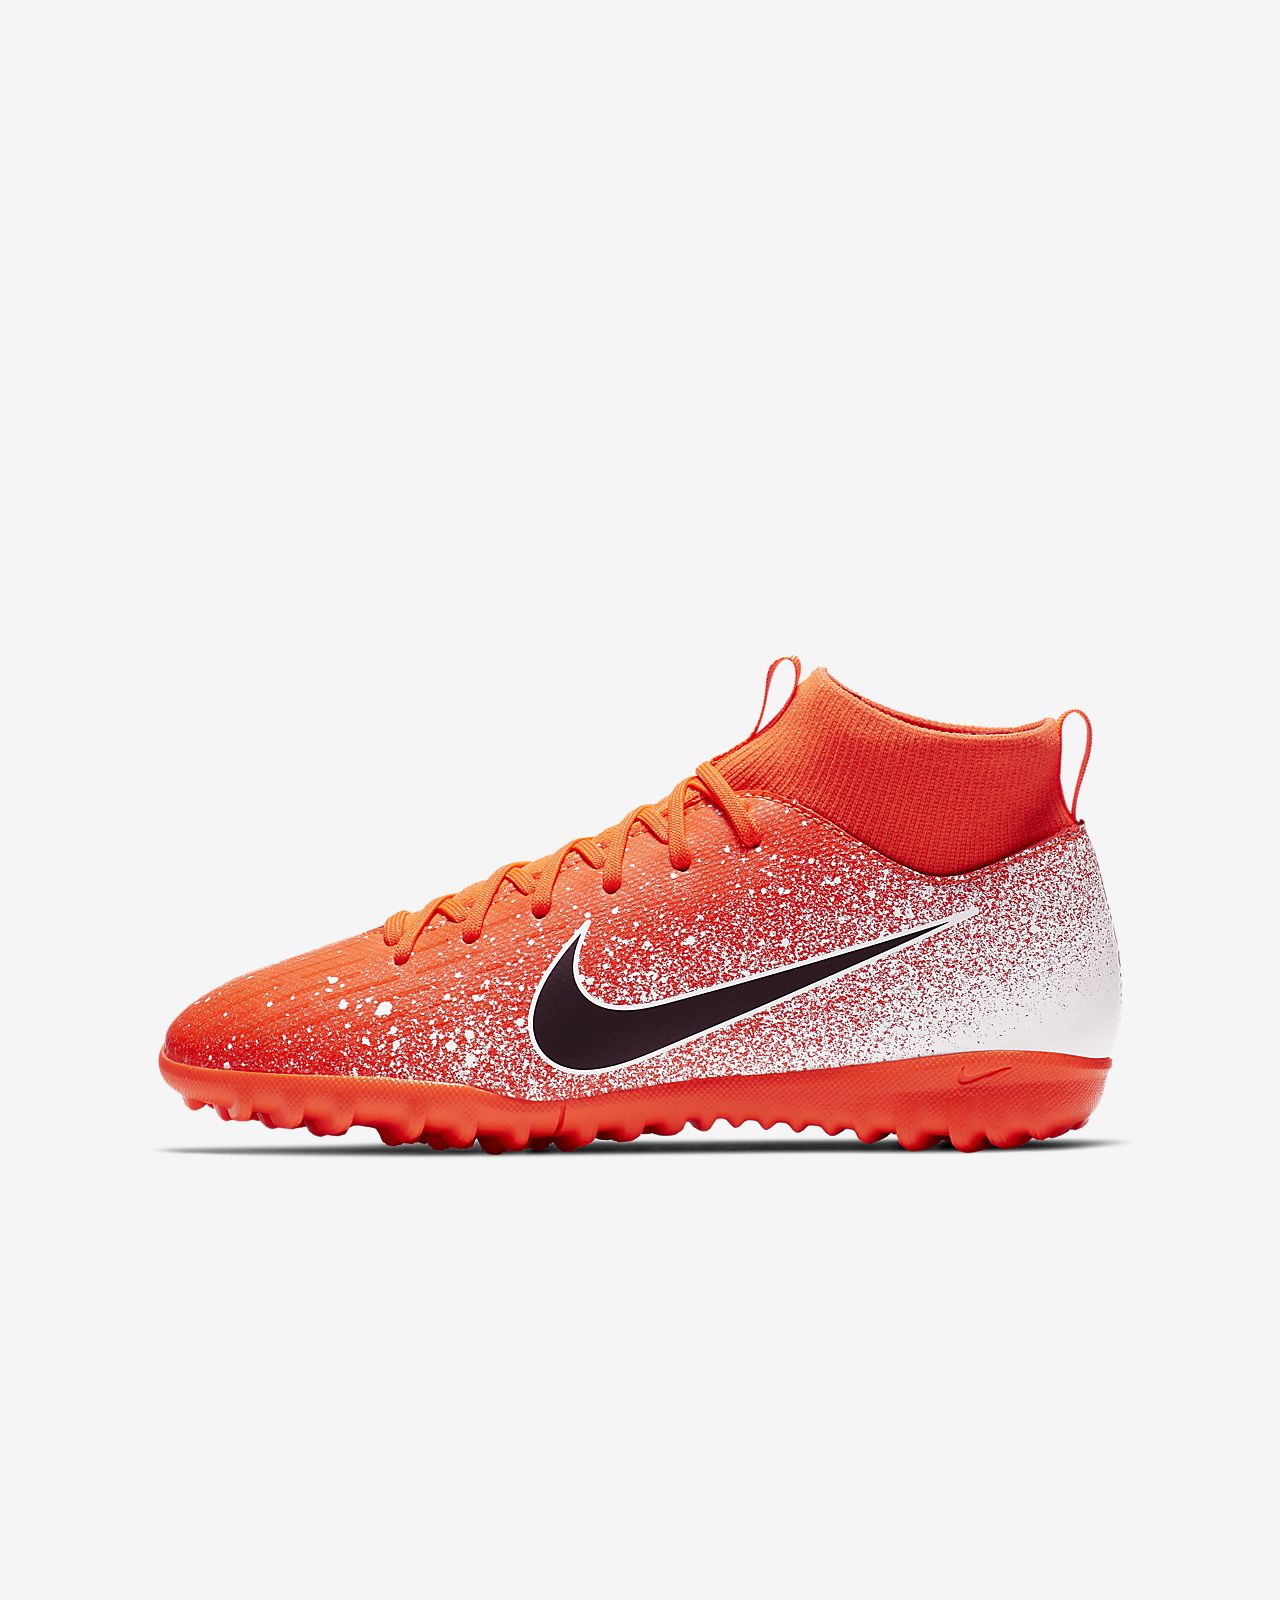 Nike Mercurial Superfly 6 Academy TF Game Over. Unisport